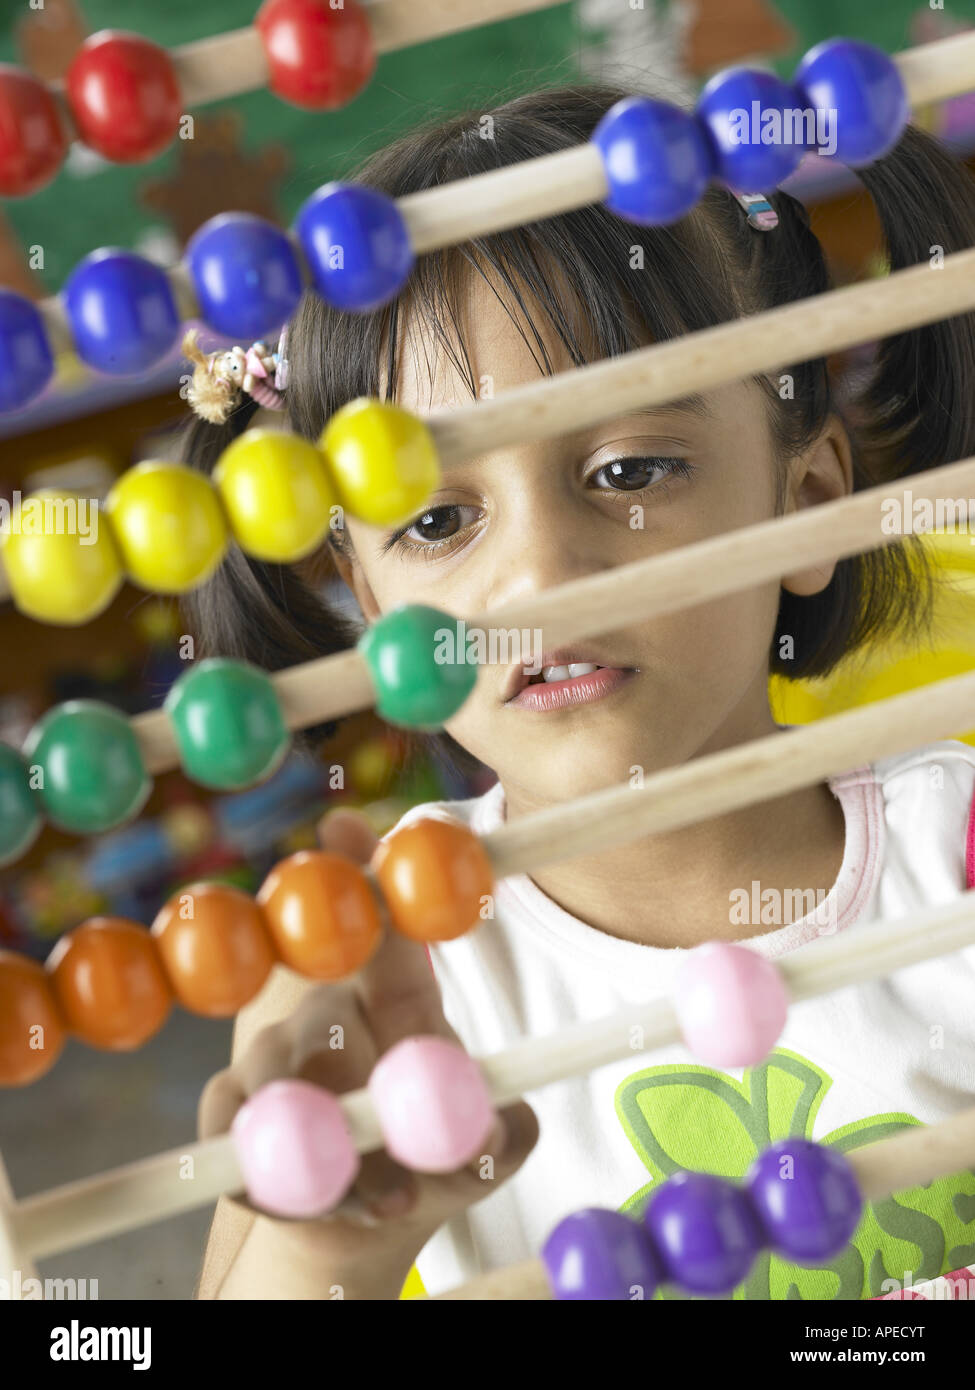 South Asian Indian girl sitting in front of abacus and calculating beads sliding on wires in nursery school MR Stock Photo